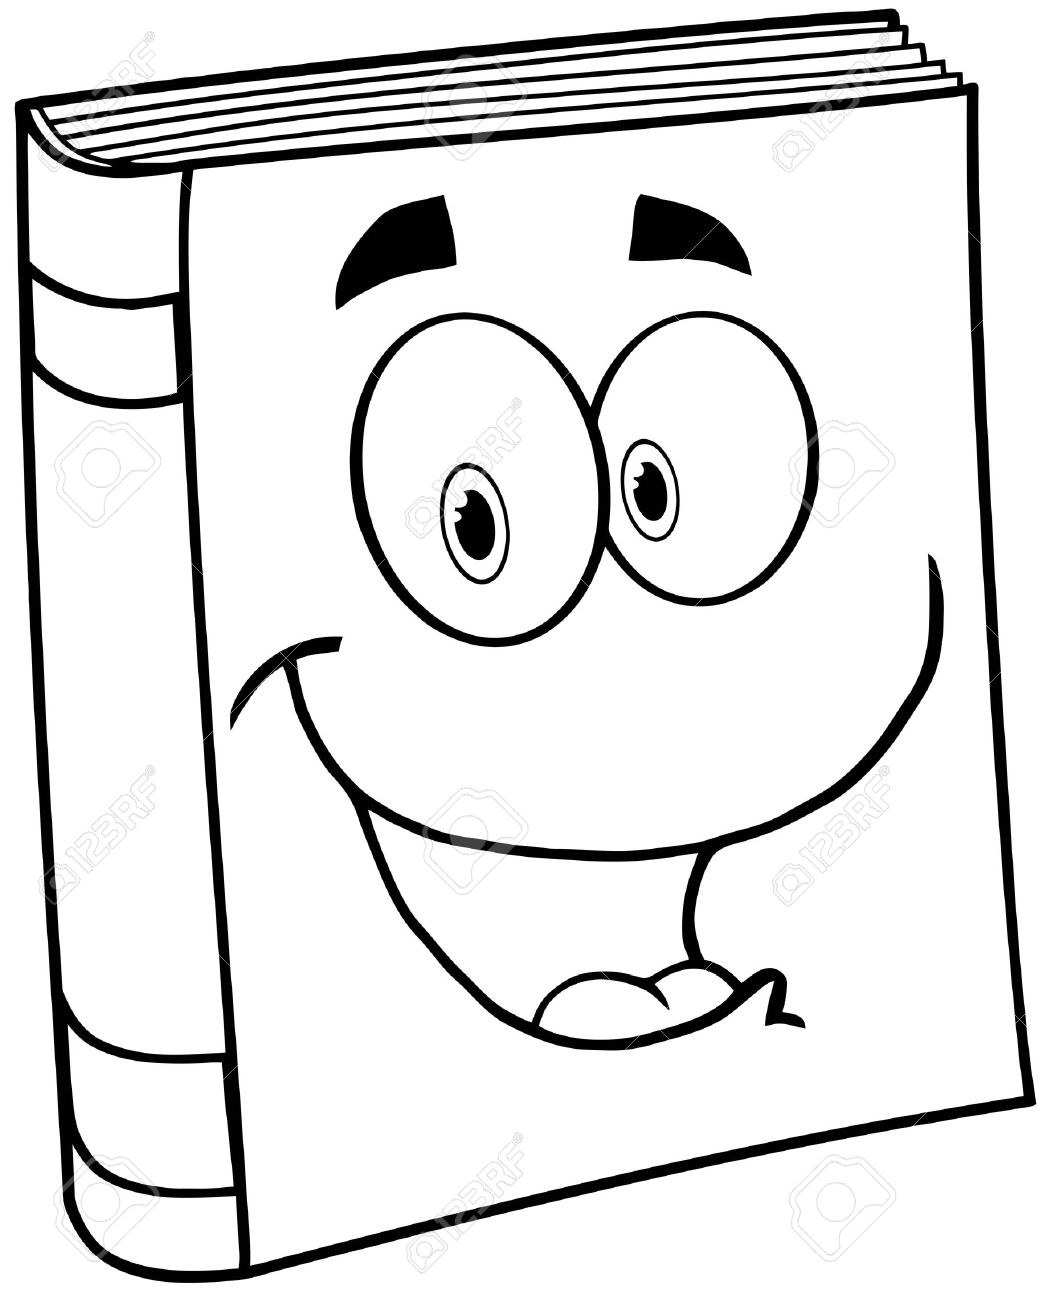 Cartoon drawing books clip. Book clipart easy